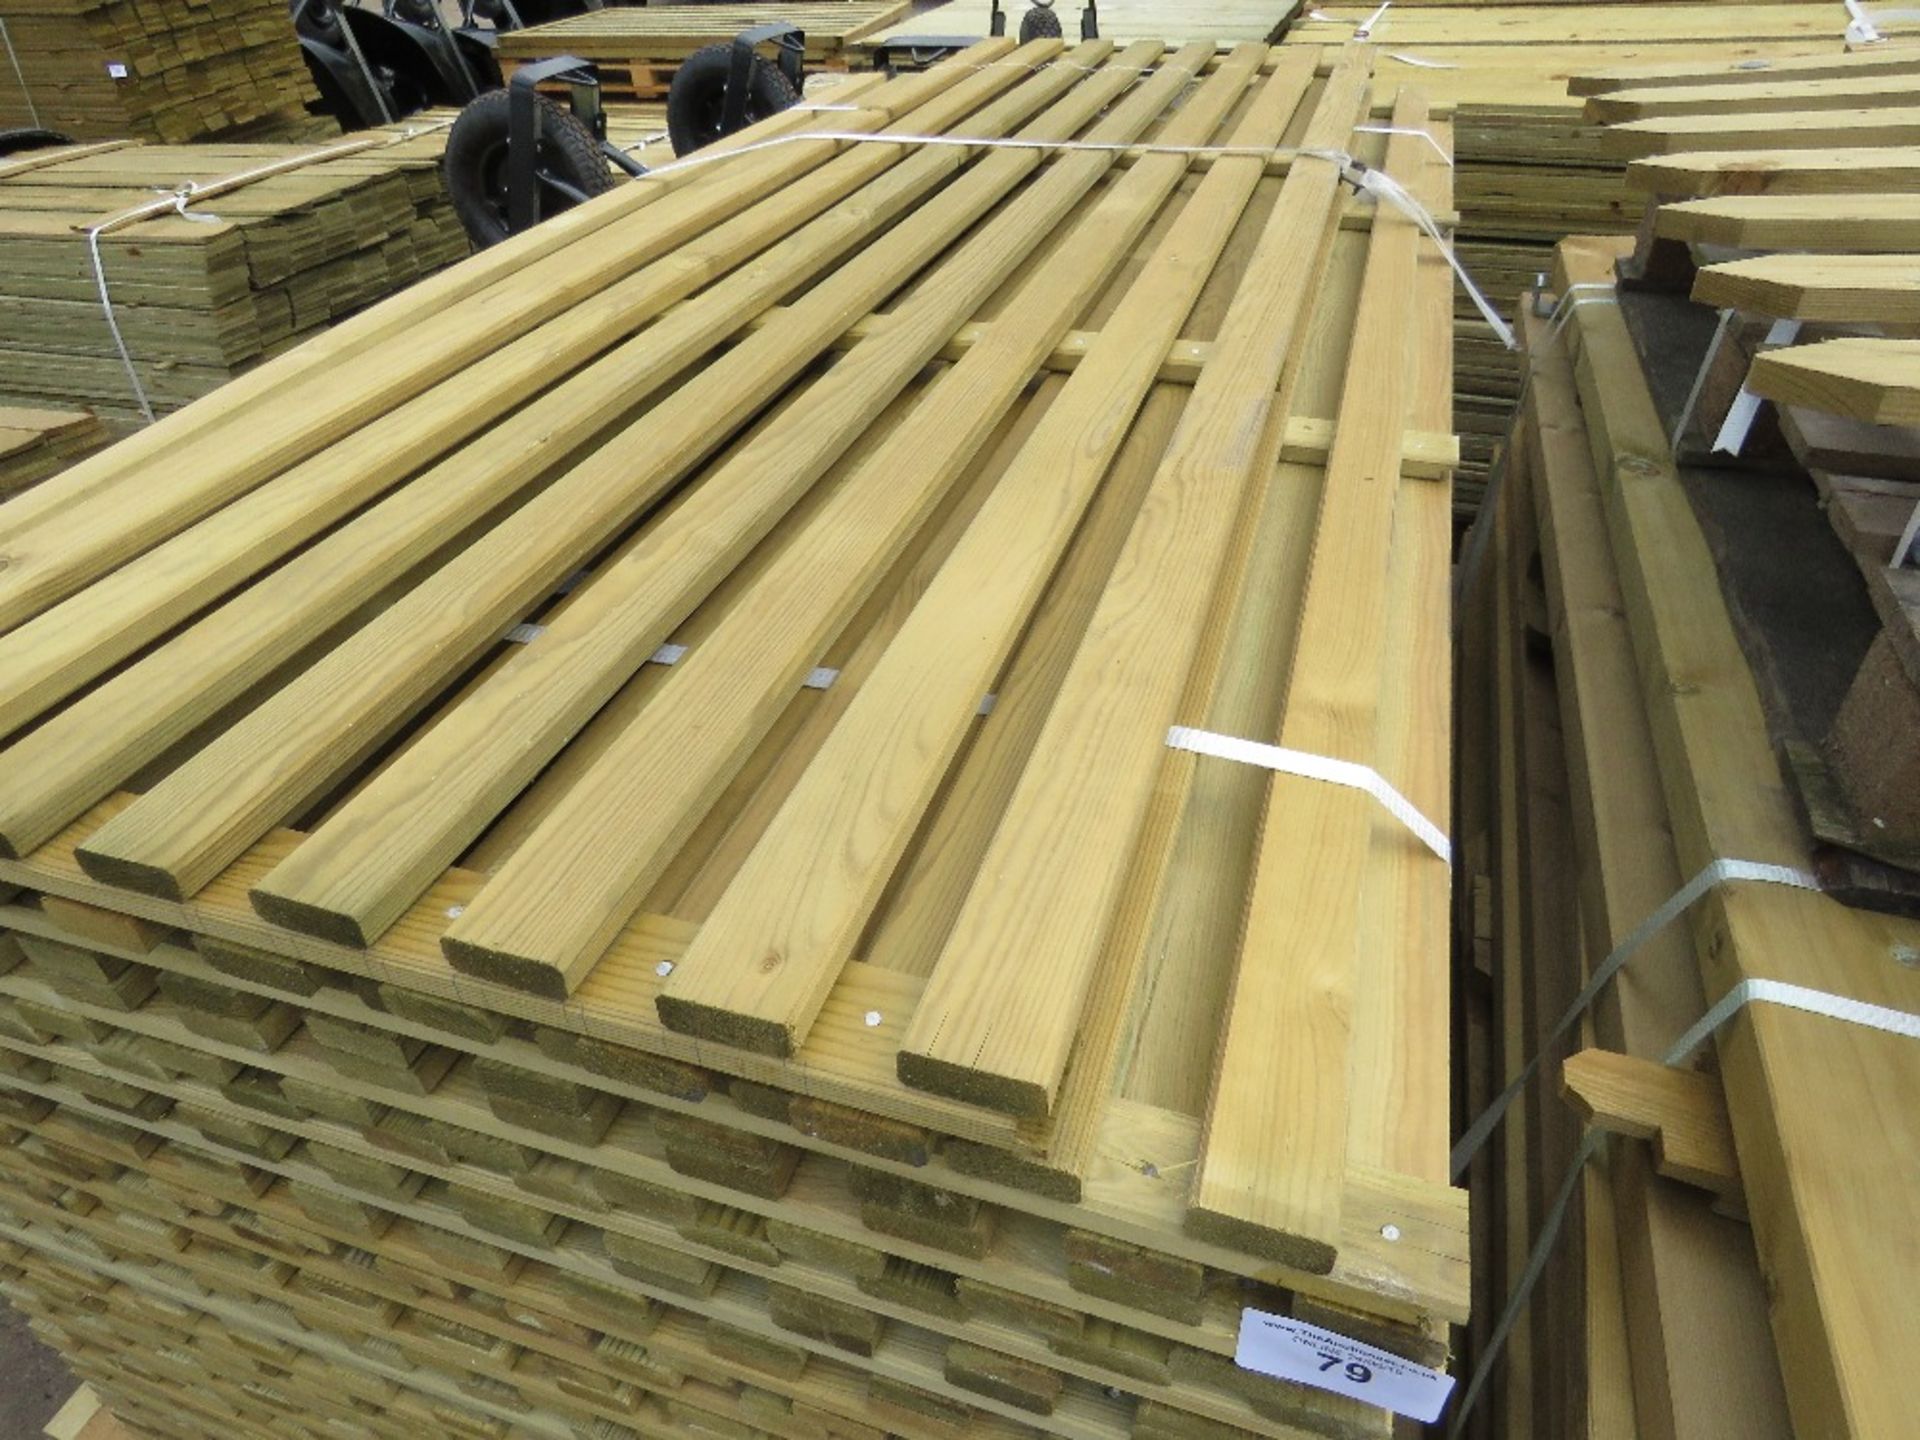 2 X PALLETS OF HIT AND MISS LIGHT WEIGHT FENCE PANLES 6FT HEIGHT, VARIOUS WIDTHS - Image 3 of 5